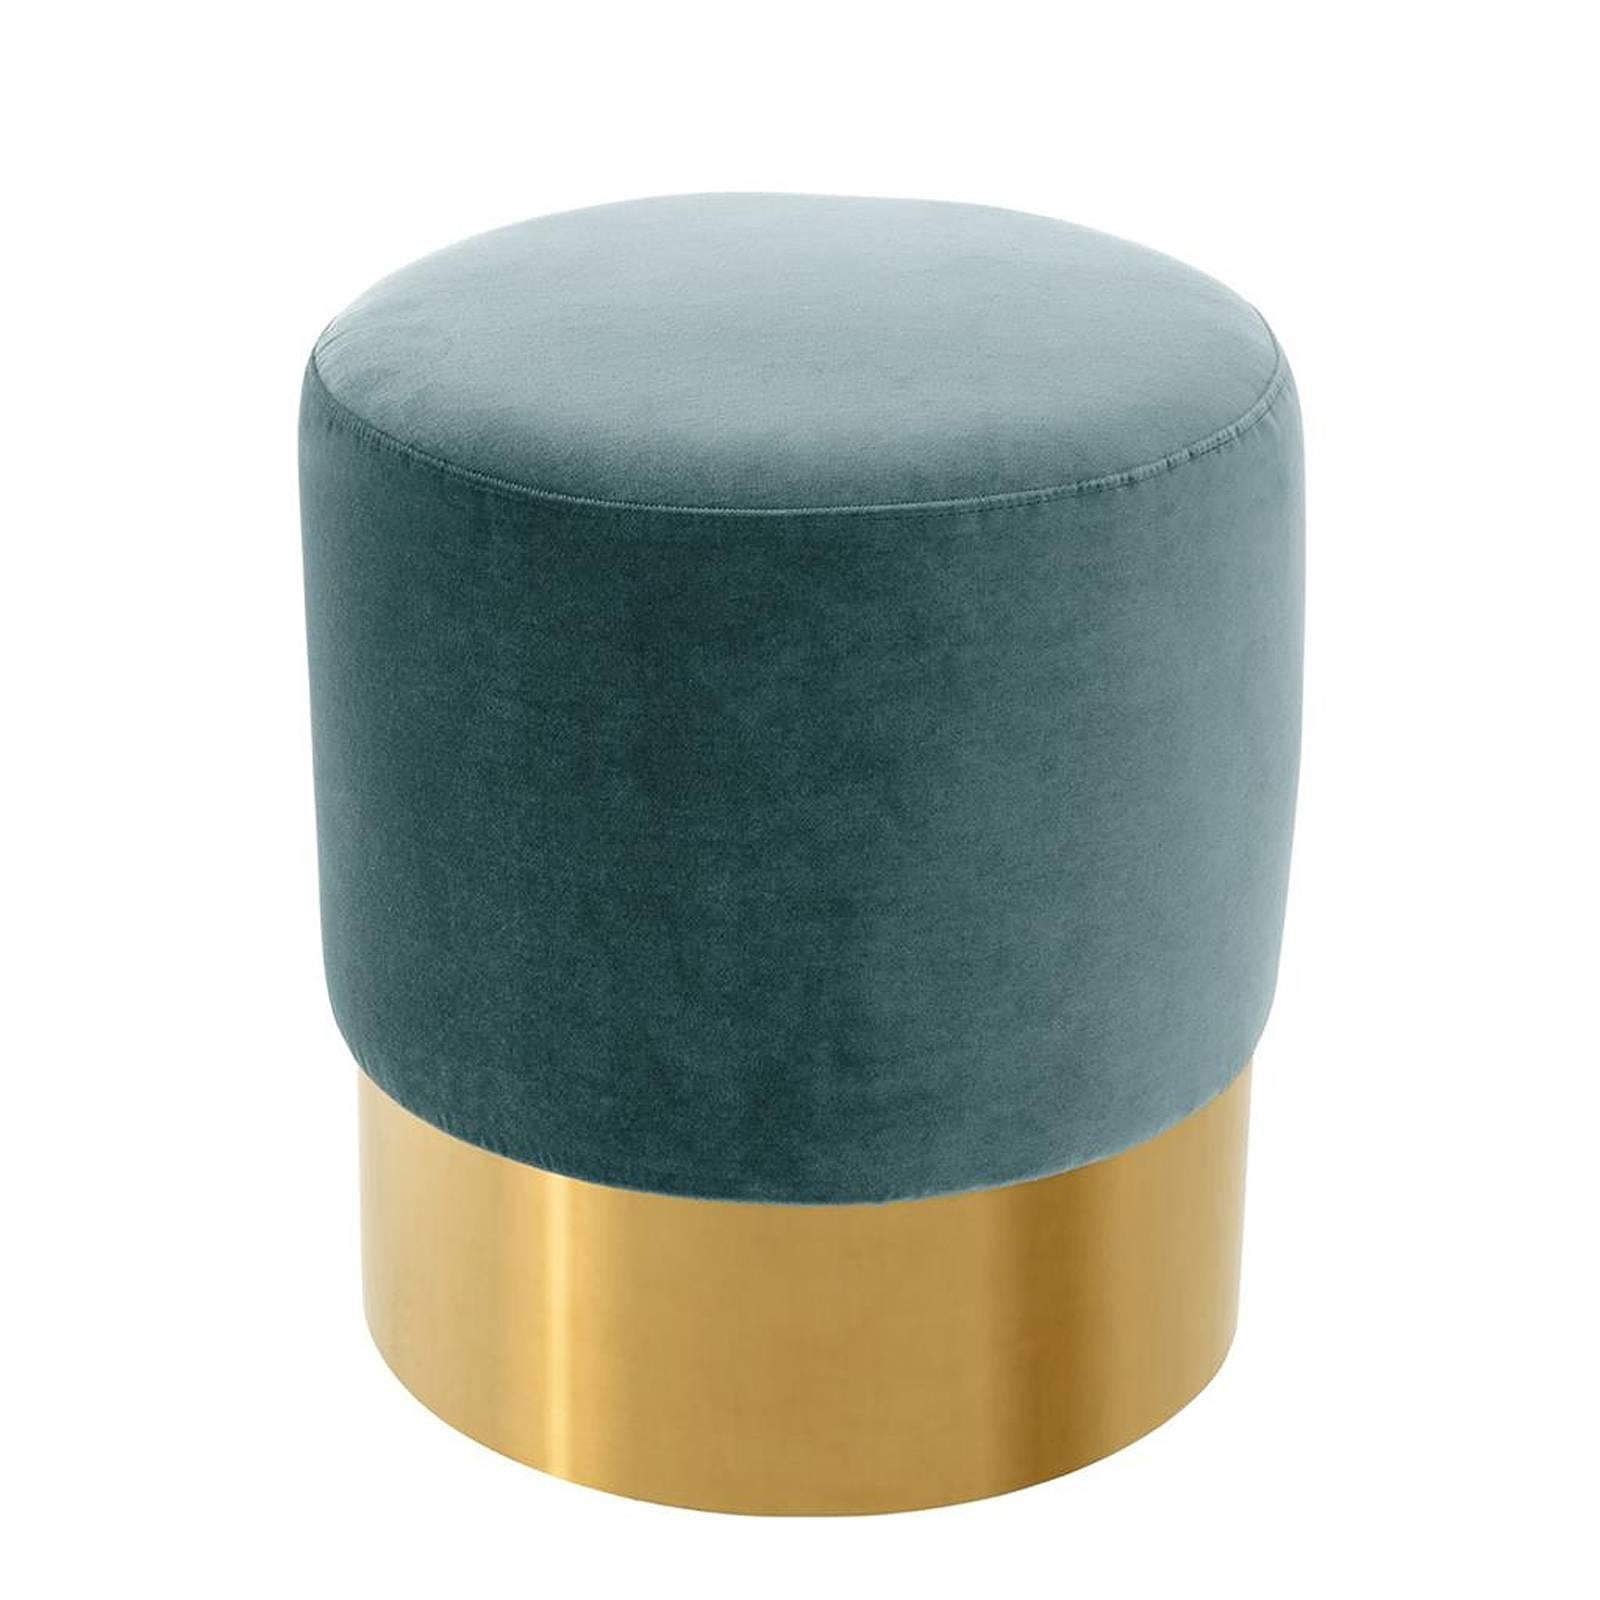 Stool Hotel lounge with base in polished stainless
steel in gold finish and with seat in turquoise velvet 
fabric. Fire retardant treated fabric. 
Also available with red or purple velvet fabric.
